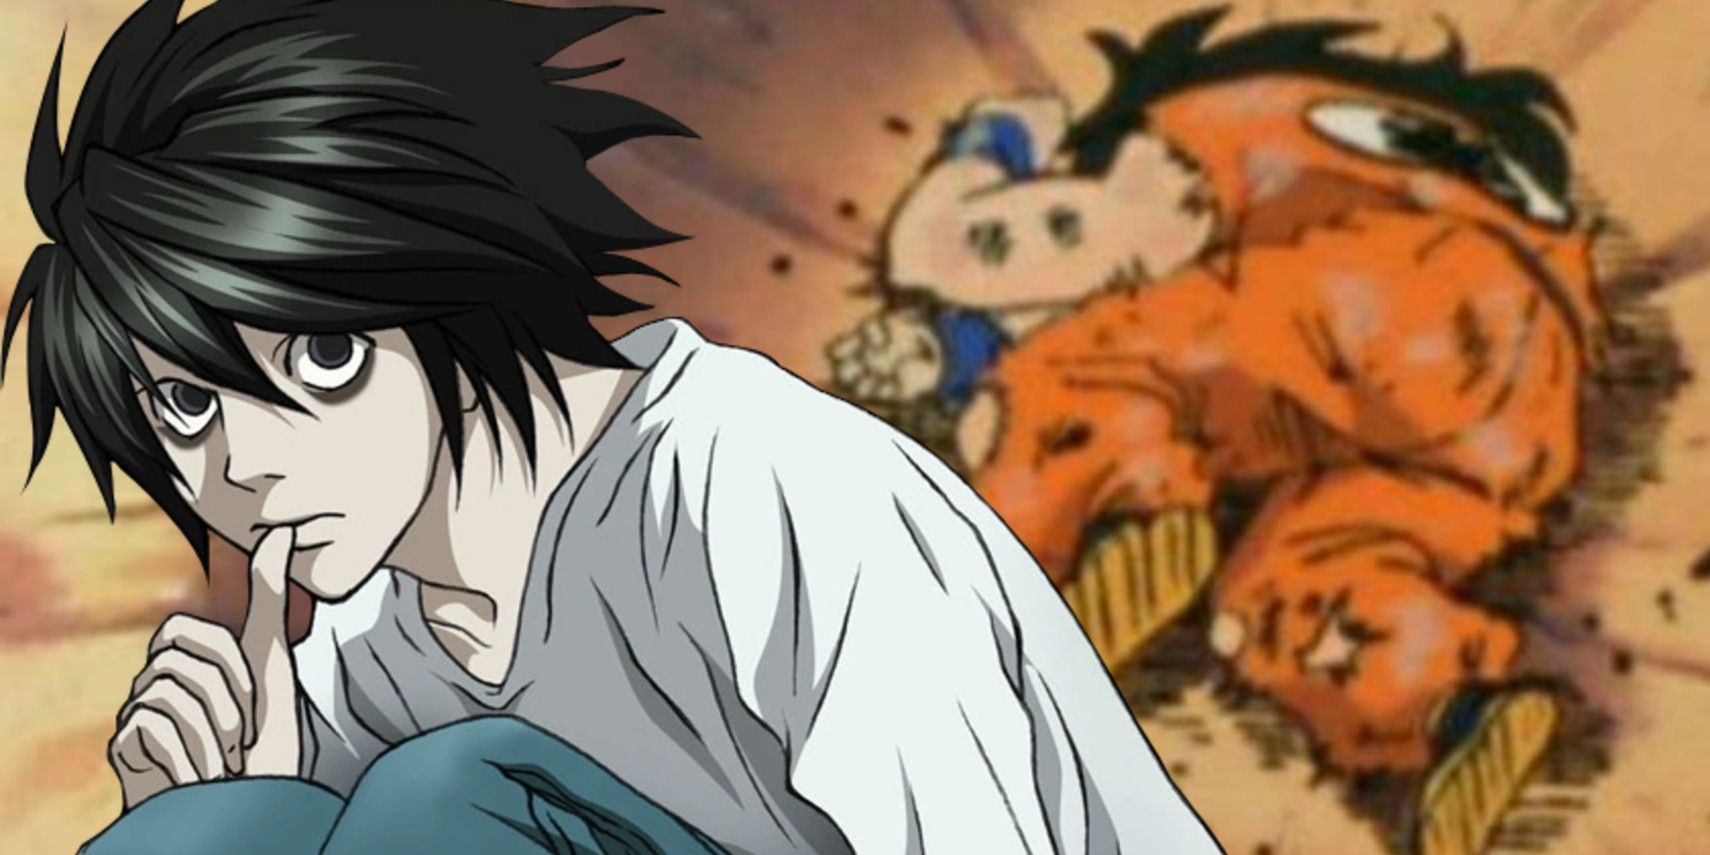 L and Yamcha, Anime characters who had one job but failed